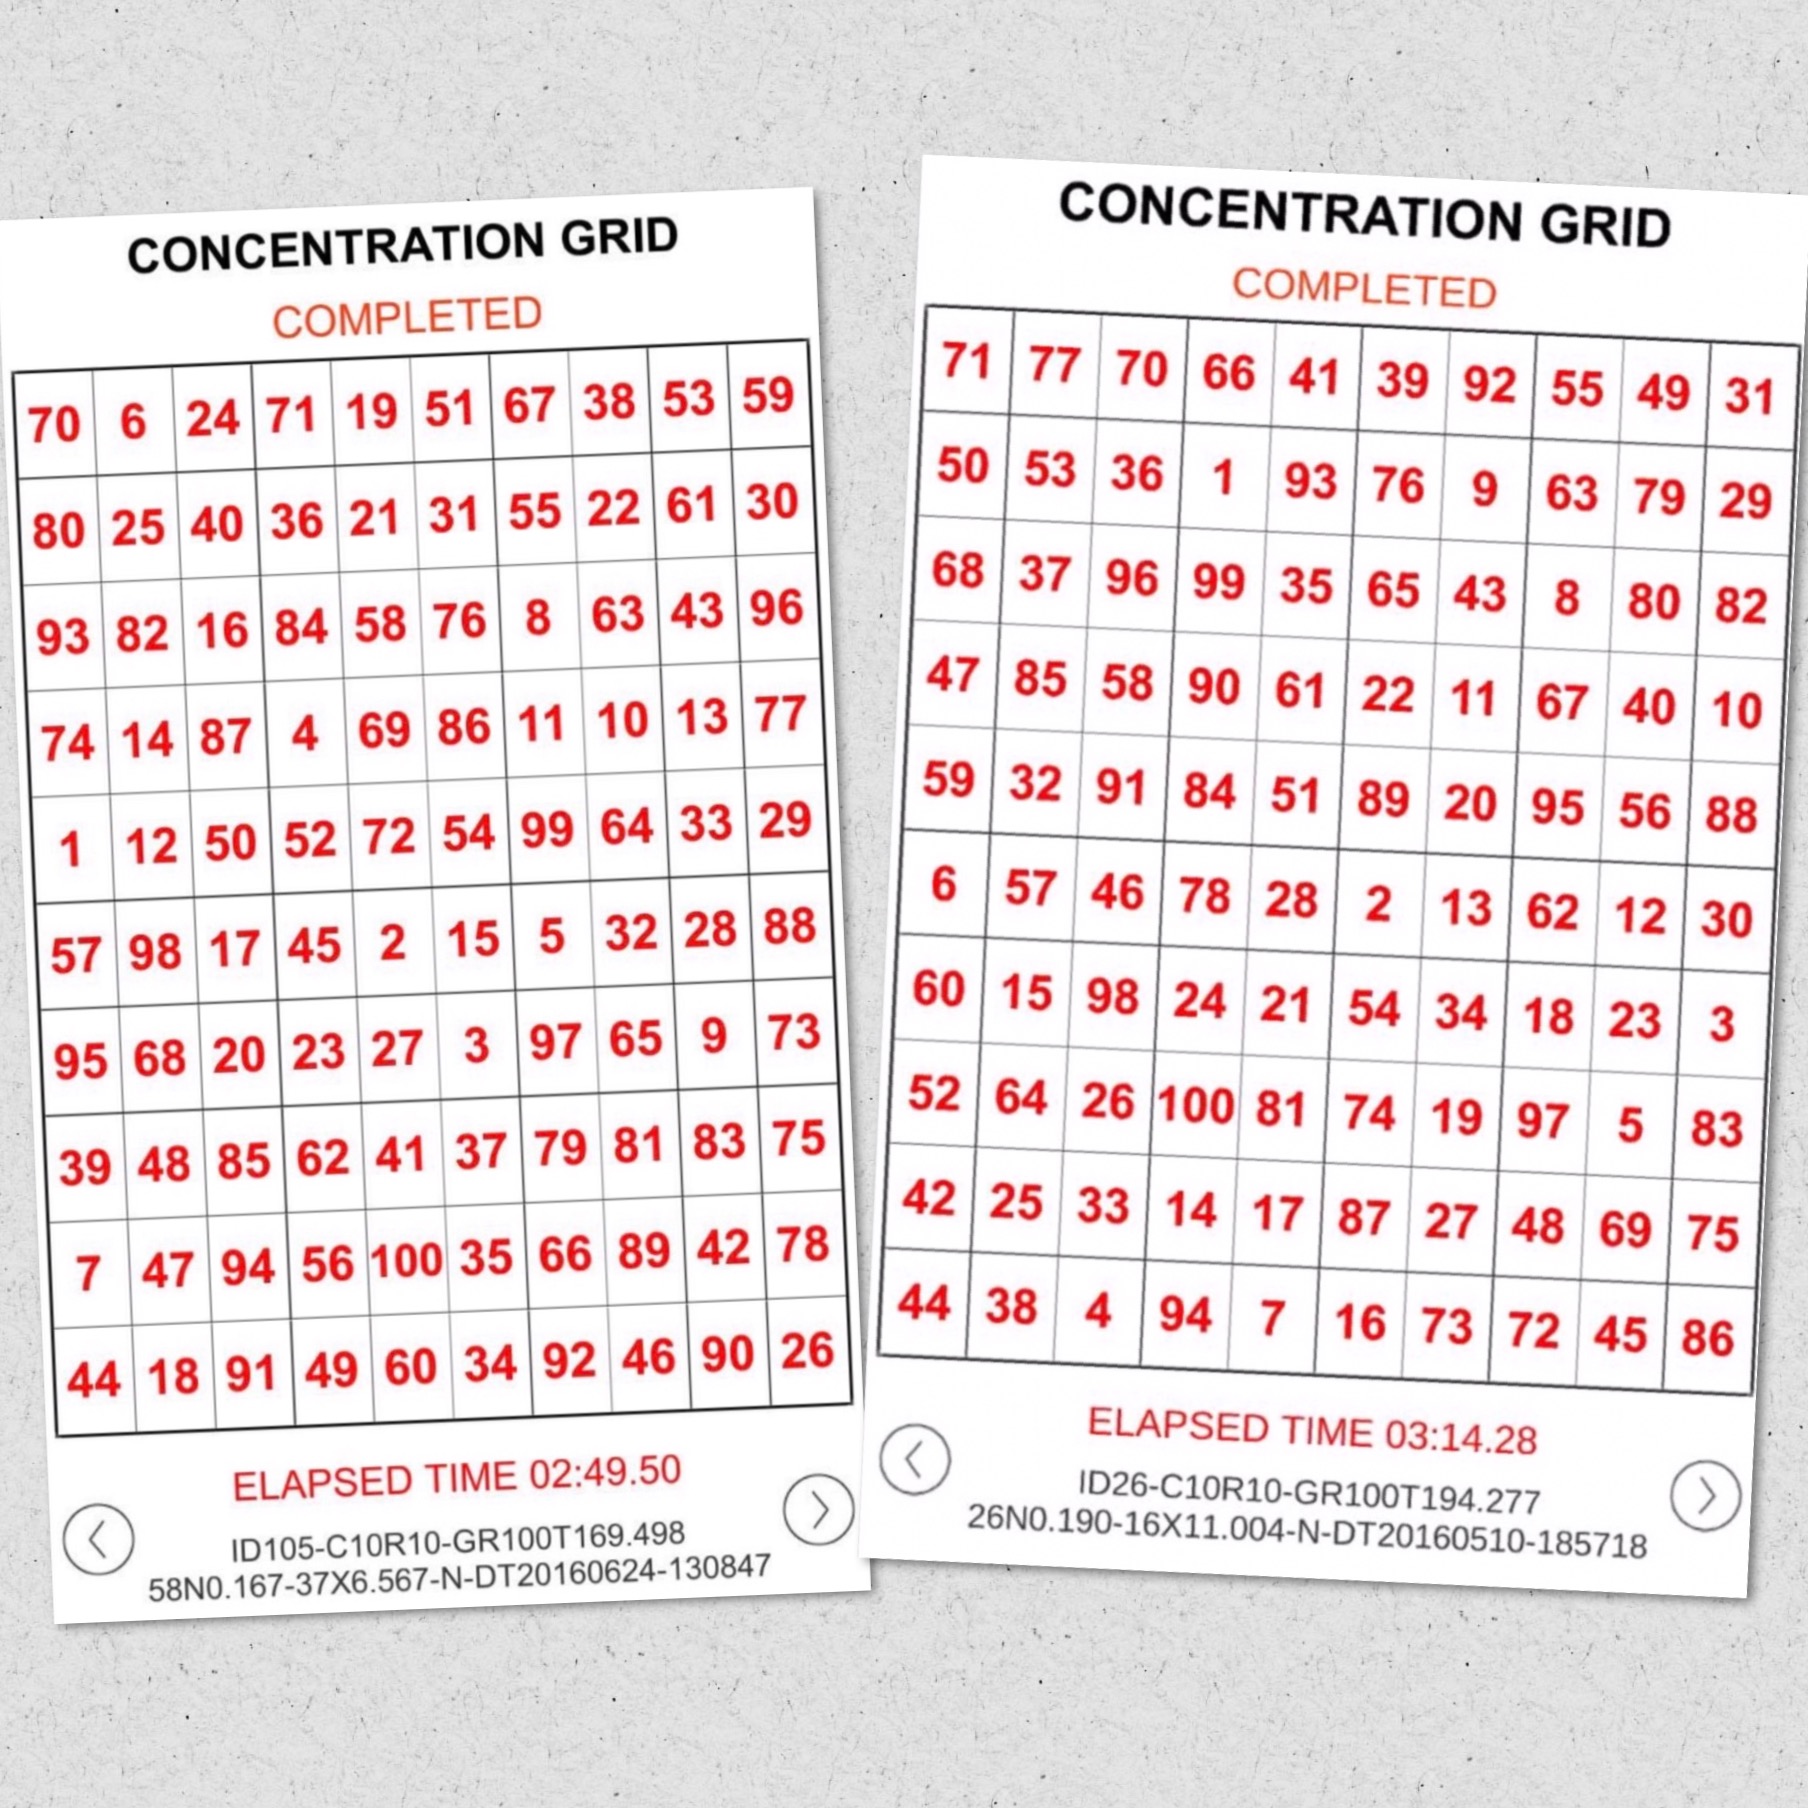 Concentration Grid is a mental skills training exercise/app for students, athletes, coaches, sports performance/psychology professionals, trainers, teachers, parents, etc.  Use concentration grids a/k/a mental focus grids with student-athletes as a tool for assessment, practice and development of focus/attention skills … and for competitive challenge and fun.  Make self-development a daily habit.  #challengeyourself #concentrationgrid -www.concentrationgrid.com - www.mentalfocusgrids.com - www.tryconcentrationgrid.com